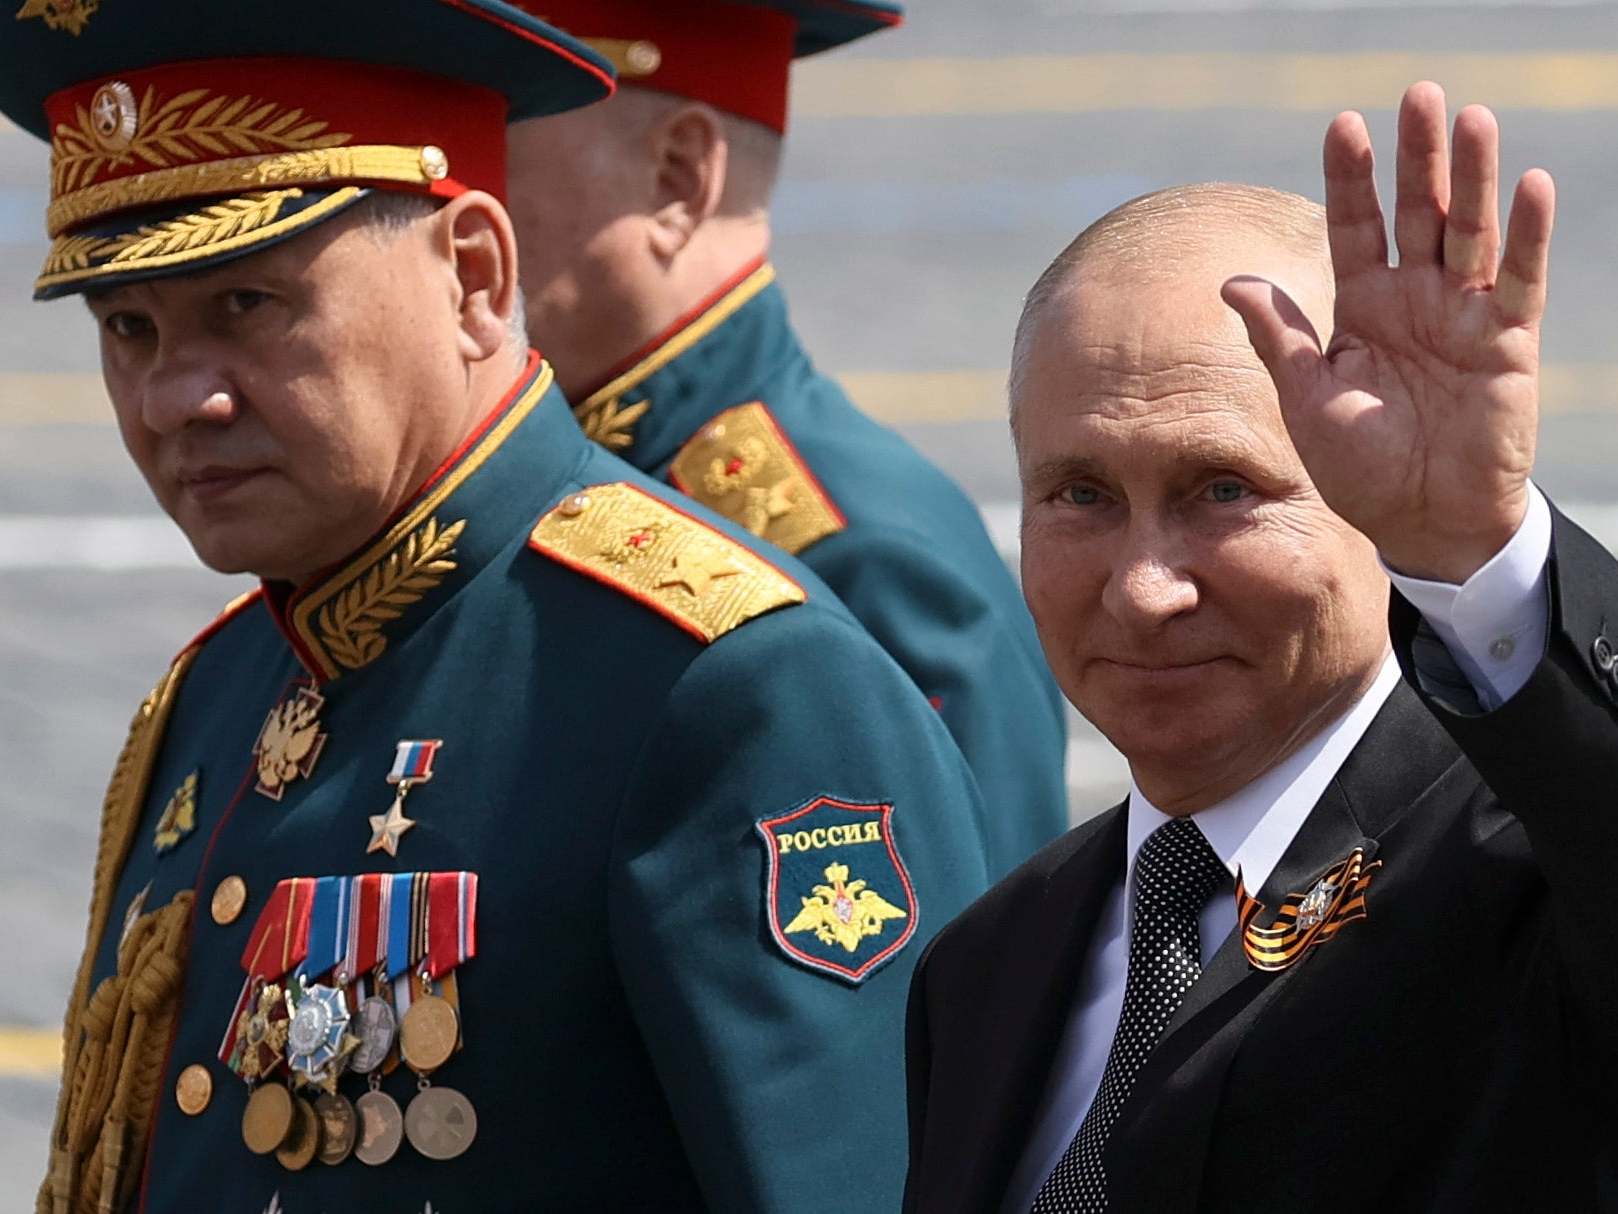 The Russian president has taken more of a back seat than he has in any crisis before